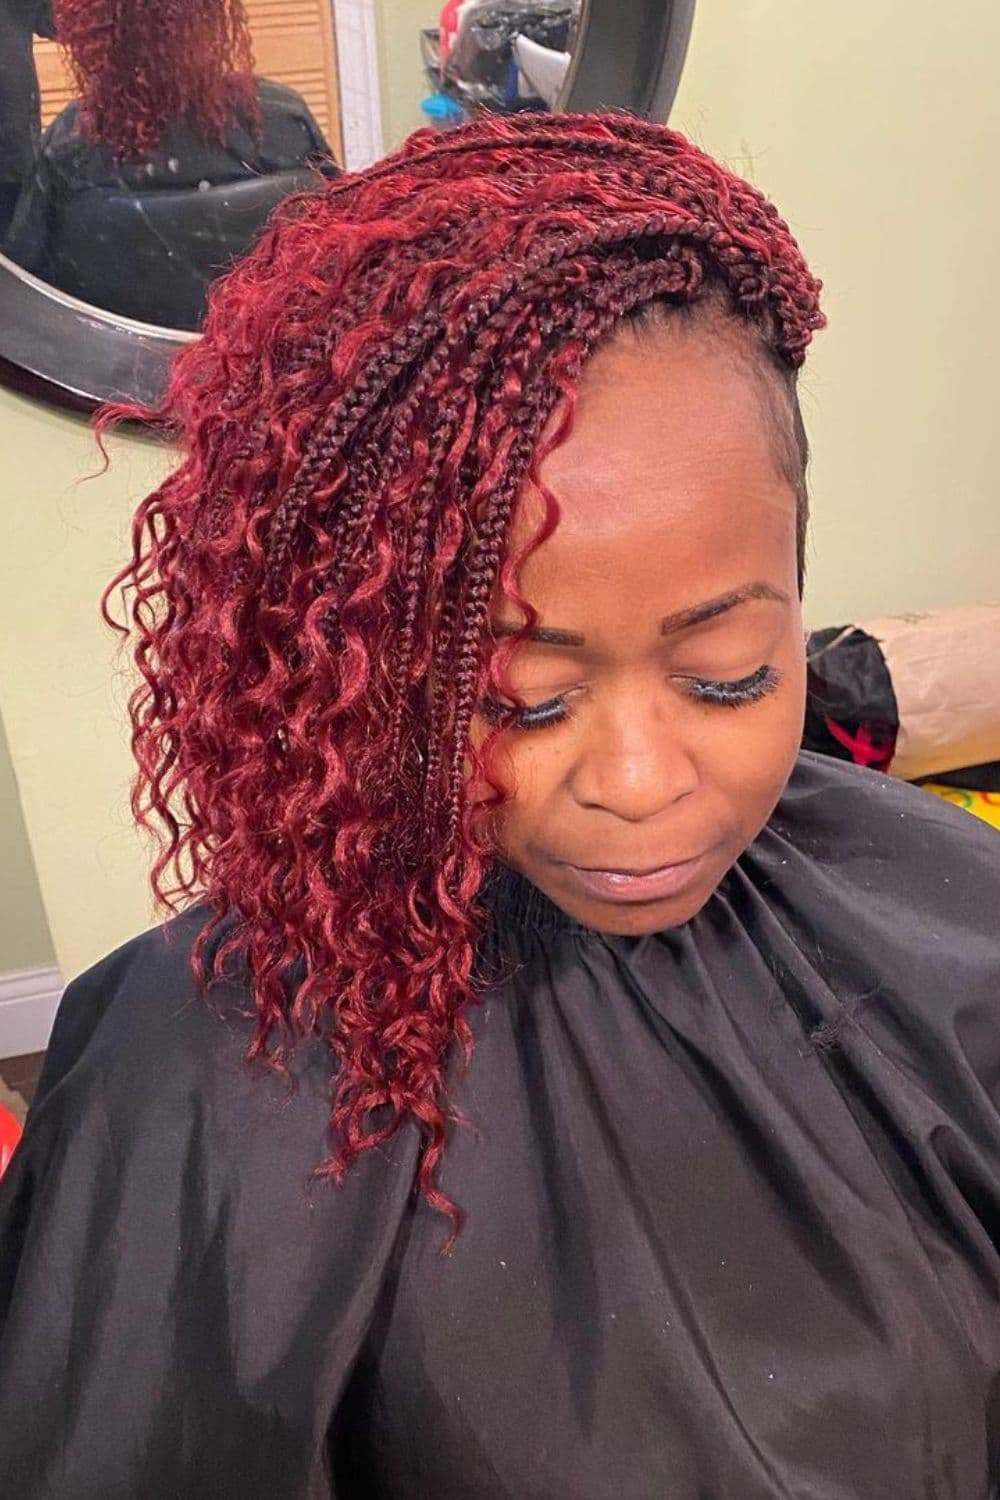 A woman with side-swept red crochet braids.